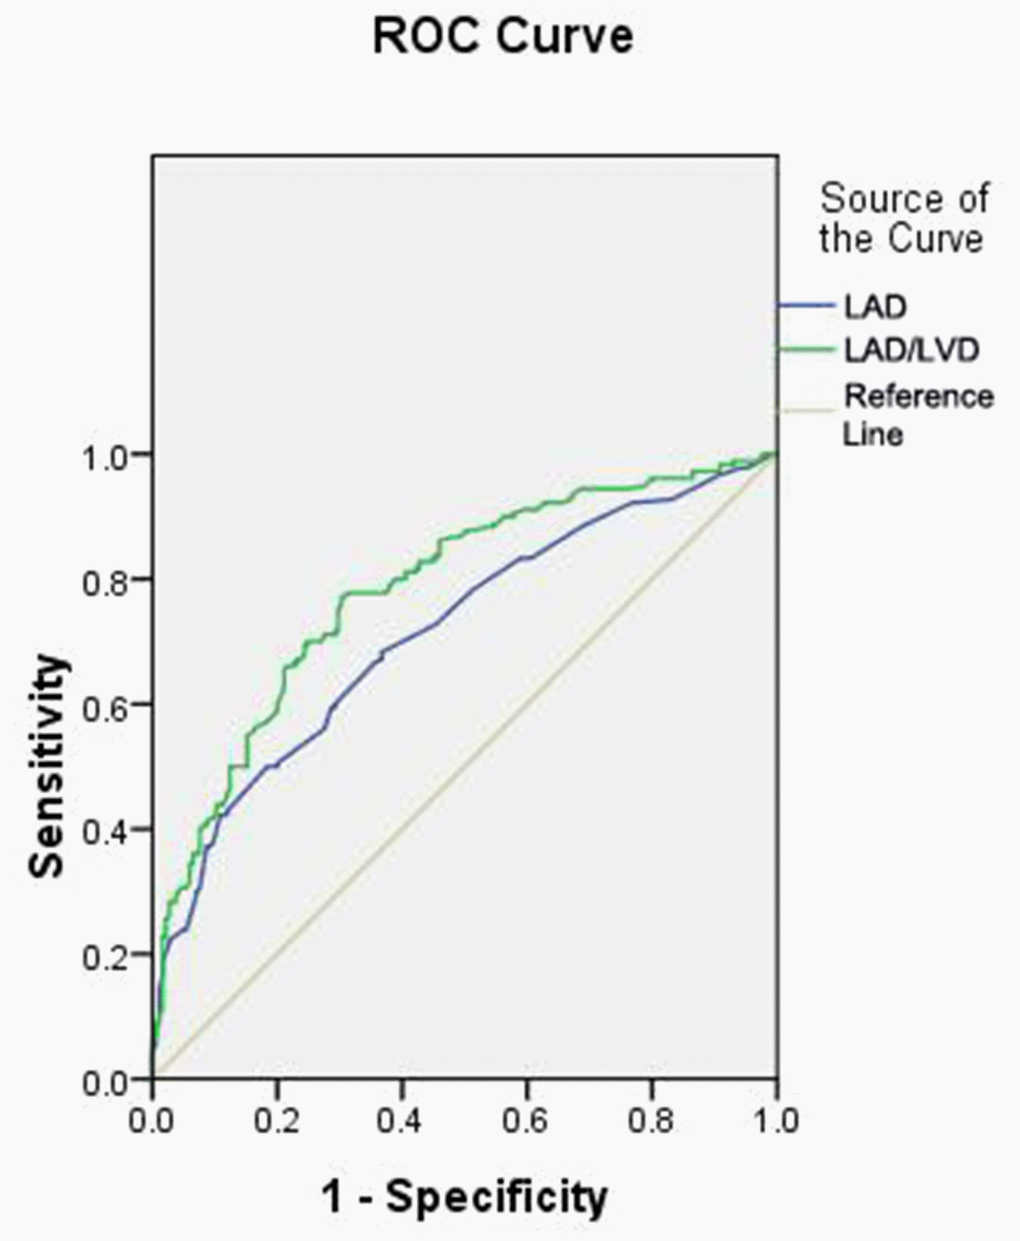 ROC Curve Analysis of LAV and LAD/LVD.